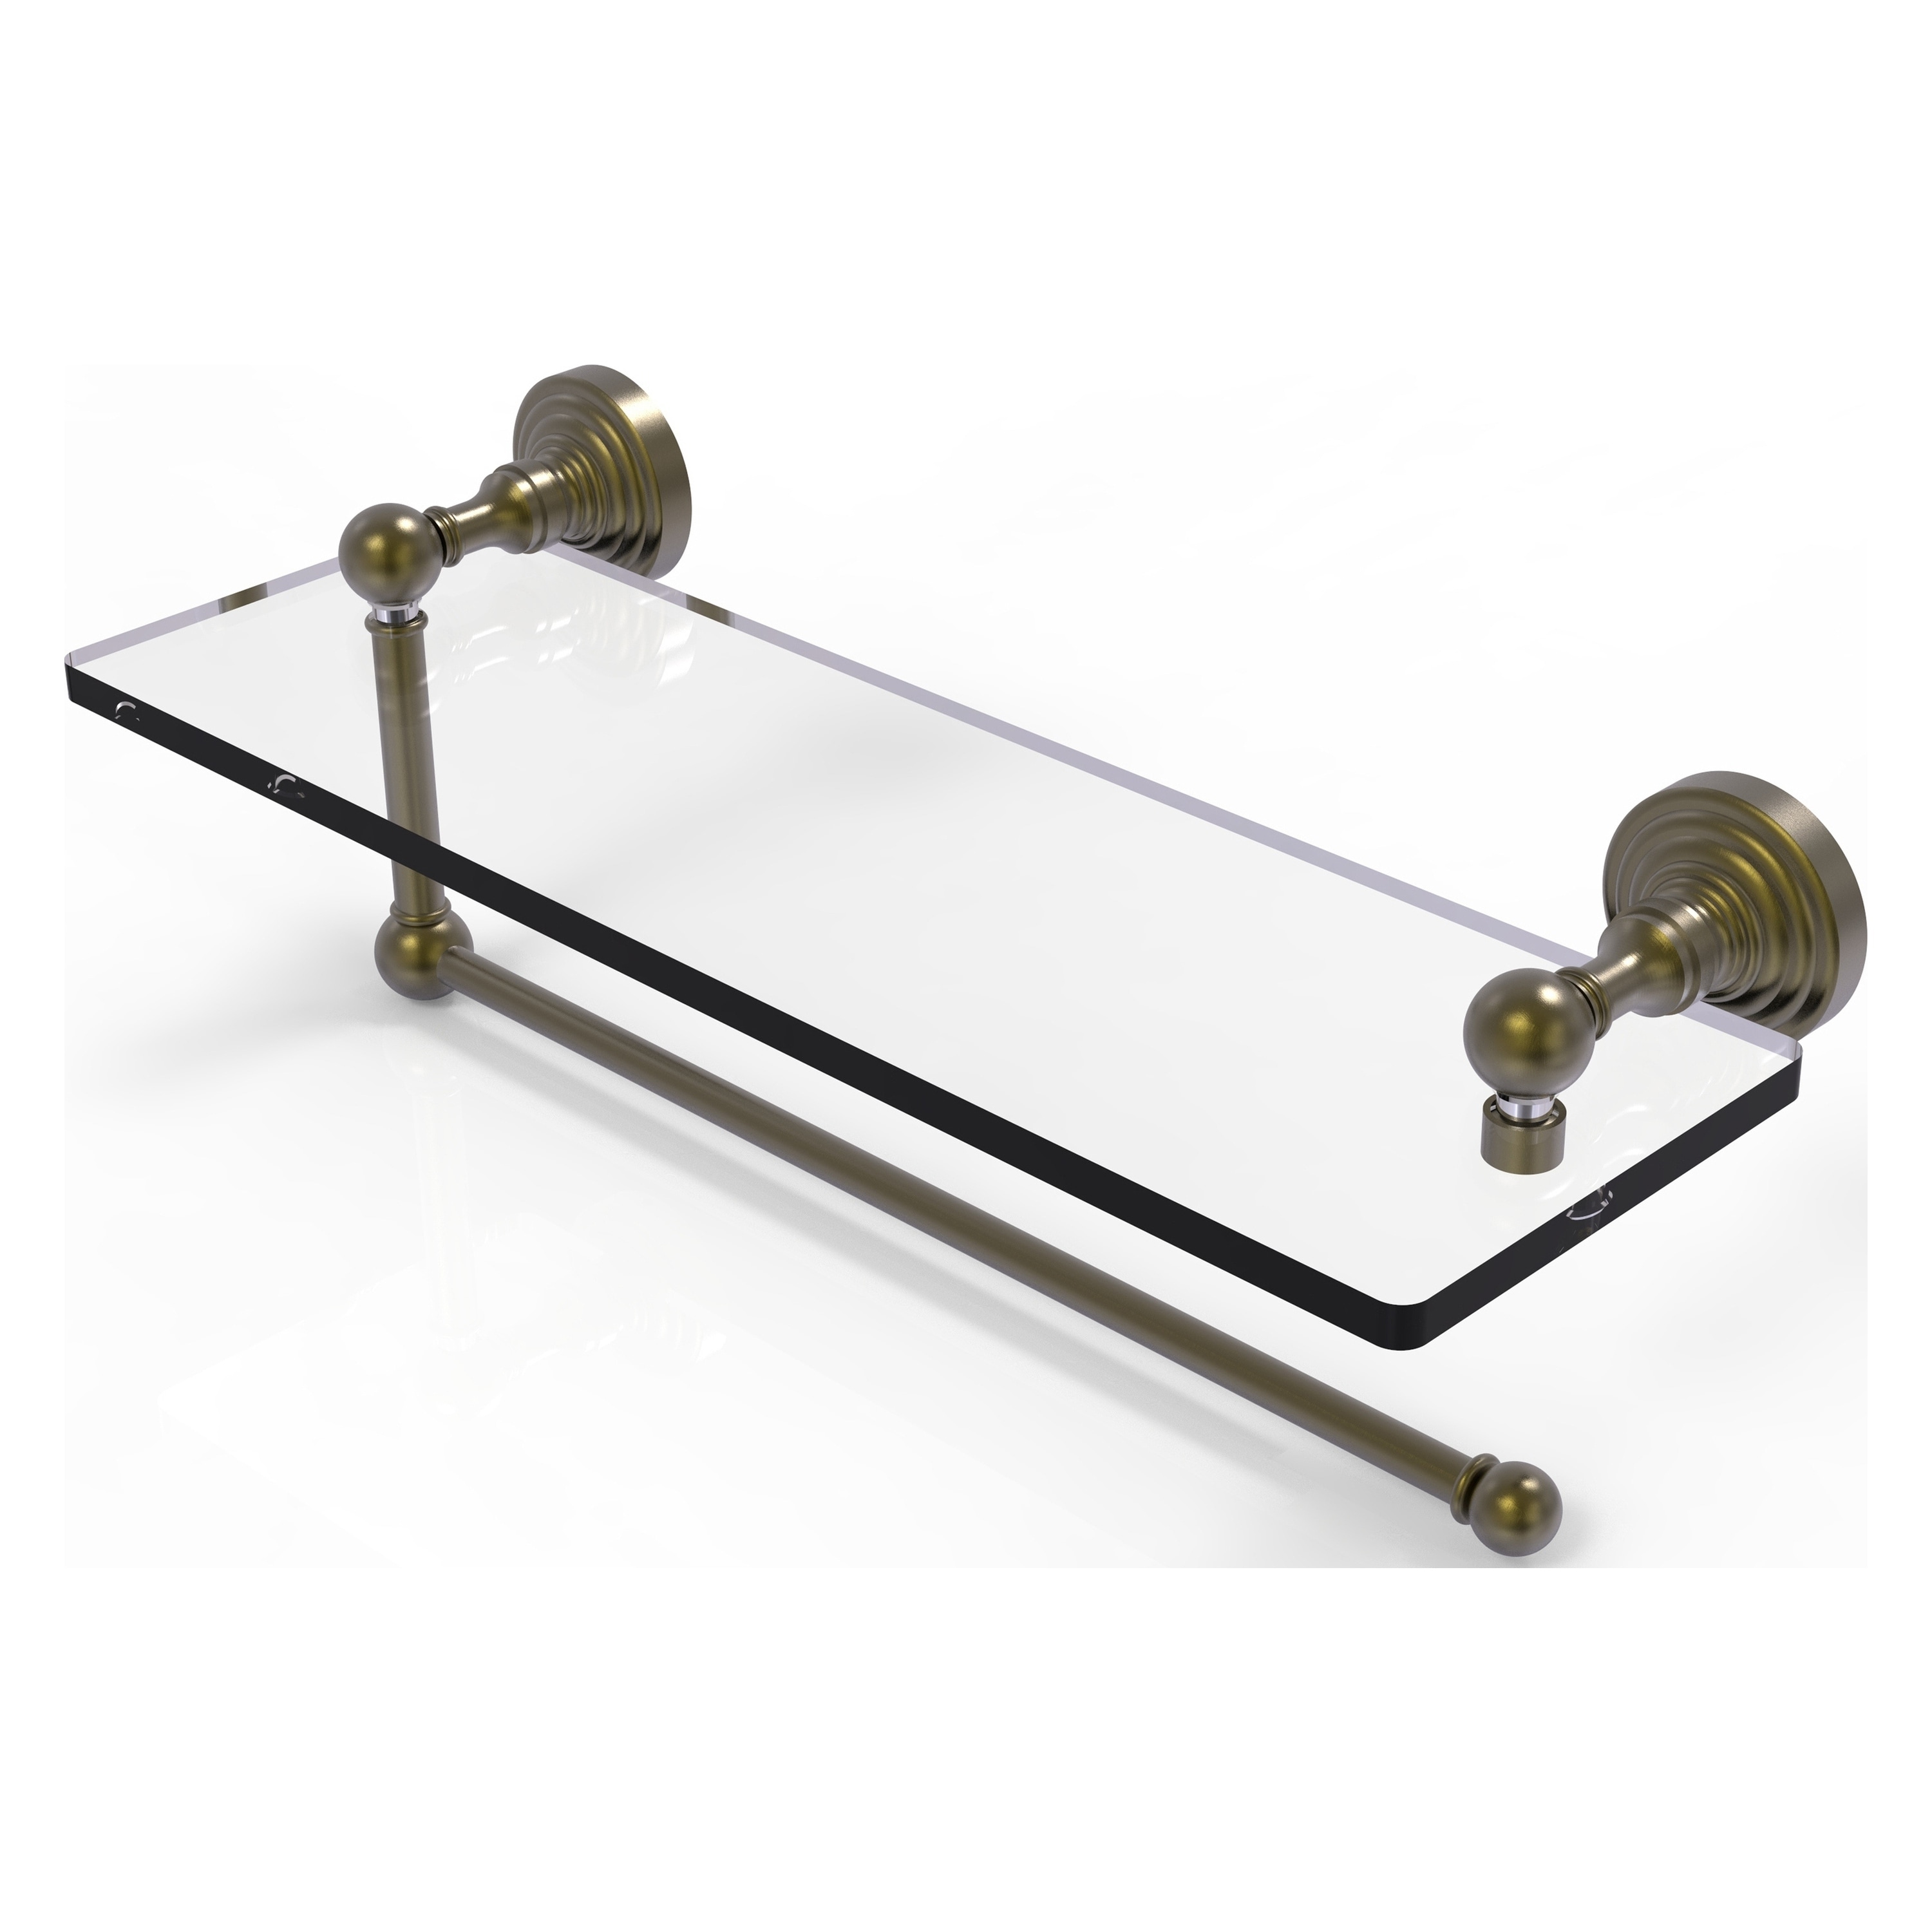 https://ak1.ostkcdn.com/images/products/is/images/direct/34f8590a61de16a349b1566175e3be763aae146c/Allied-Brass-Waverly-Place-Collection-Paper-Towel-Holder-with-16-Inch-Glass-Shelf.jpg